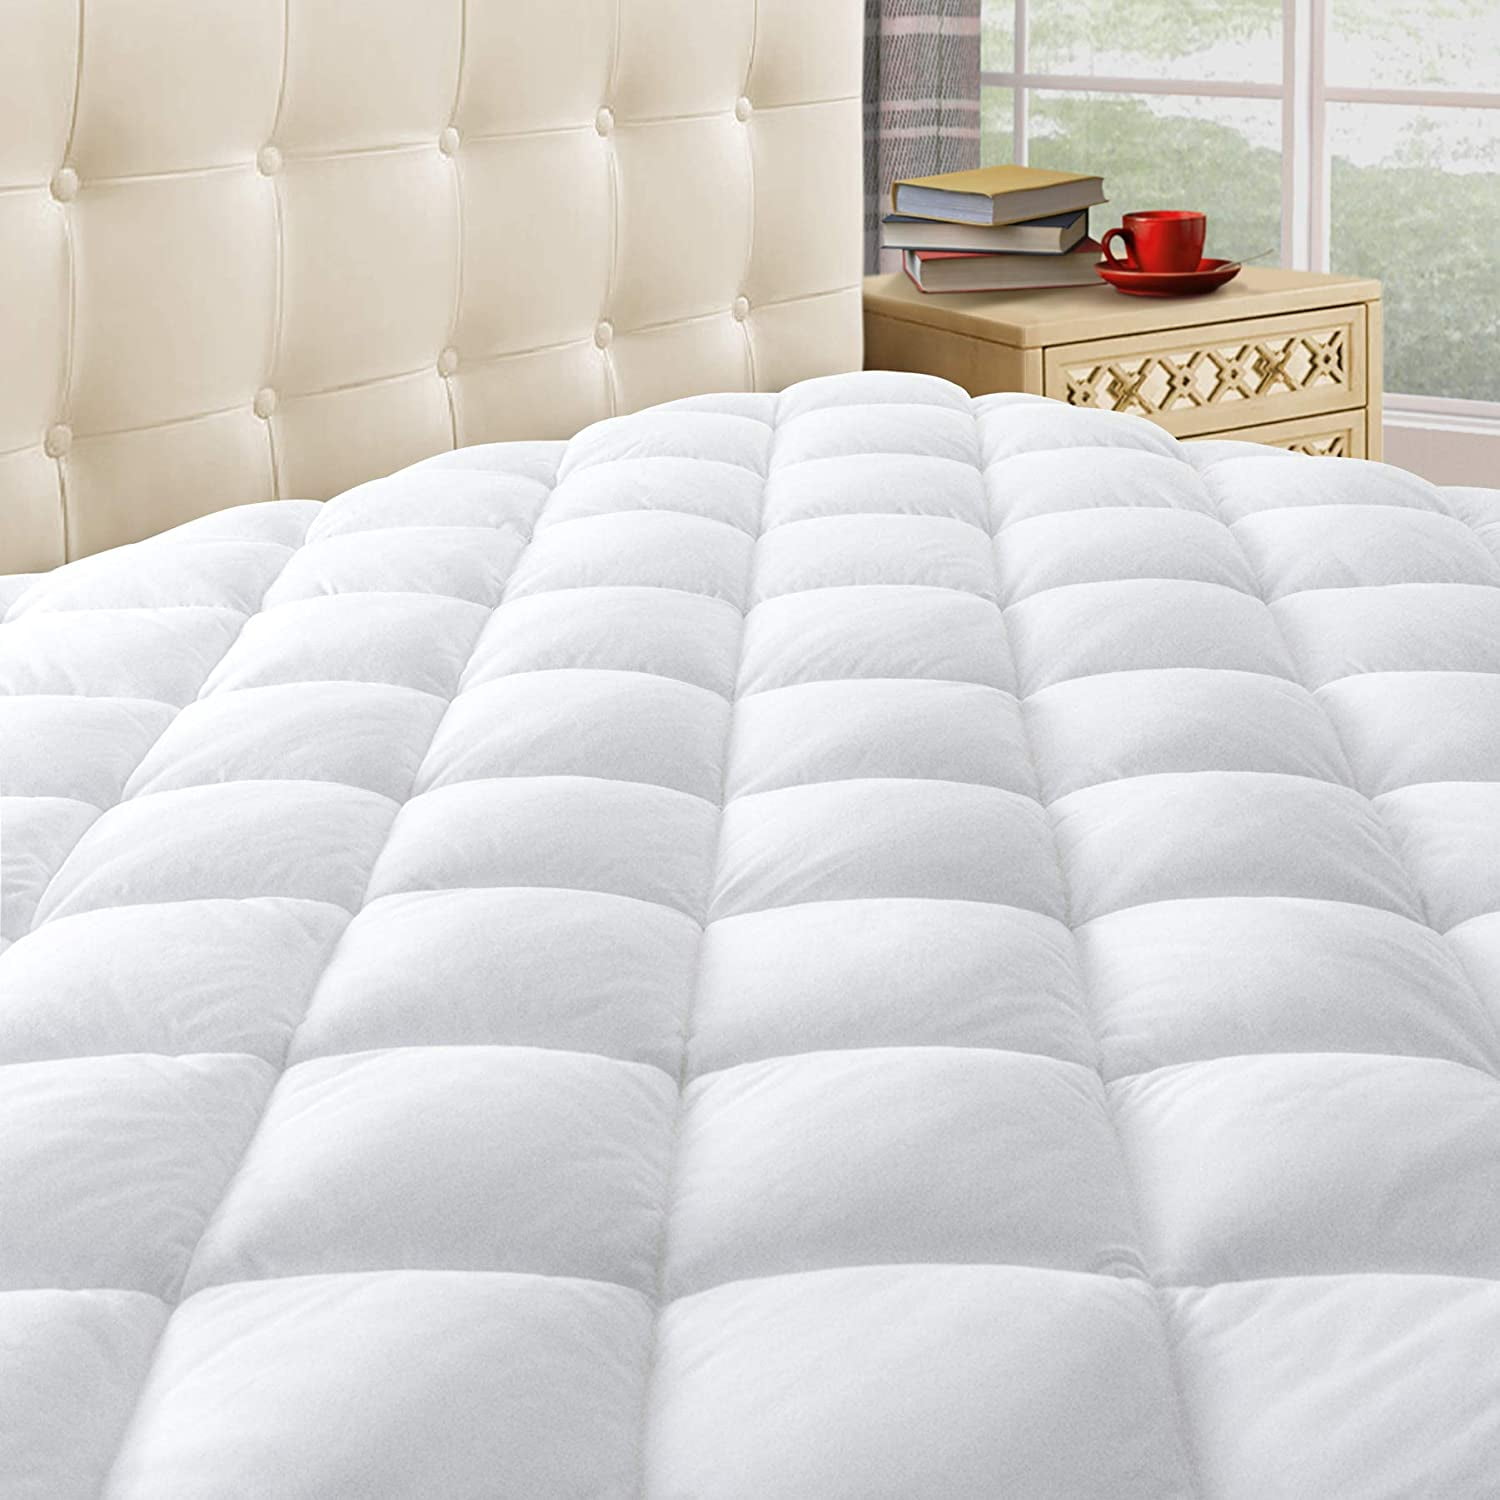 Mattress Pad Cover Pillow Top Overfilled Topper Bed Breathable Hypoallergenic 